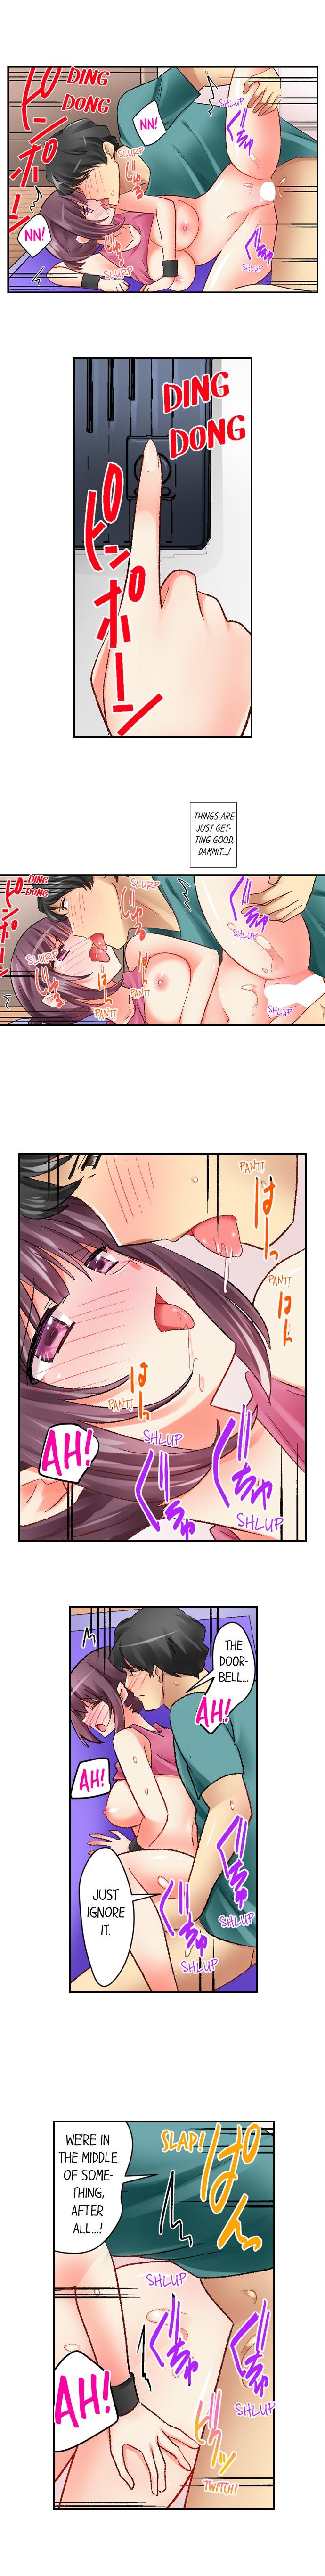 Our Kinky Newlywed Life - Chapter 57 Page 5